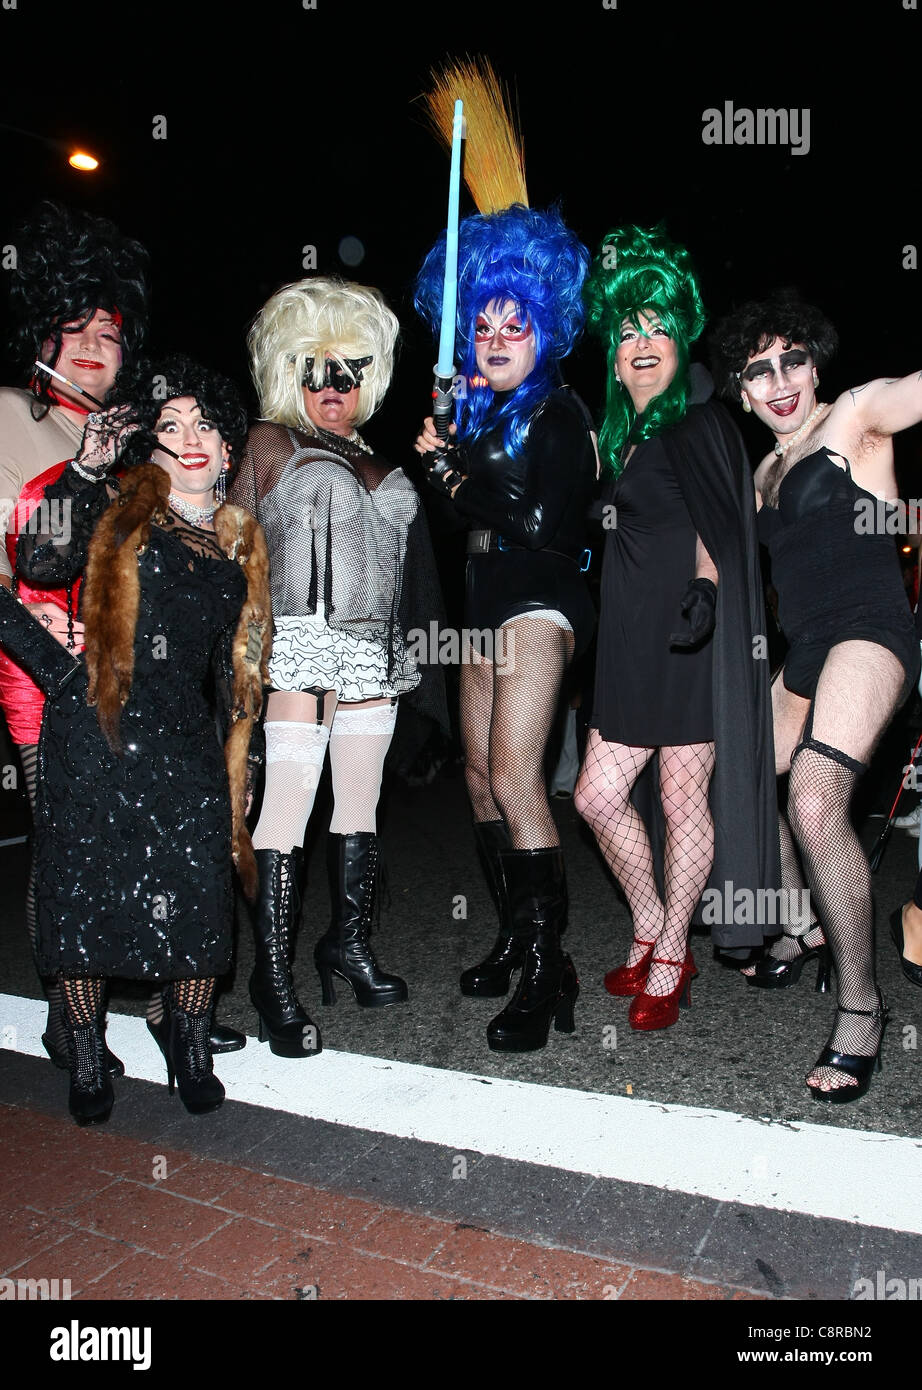 DRAG QUEENS IN COSTUME 2011 WEST HOLLYWOOD COSTUME CARNAVAL LOS ANGELES CALIFORNIA USA 31 October 2011 Stock Photo